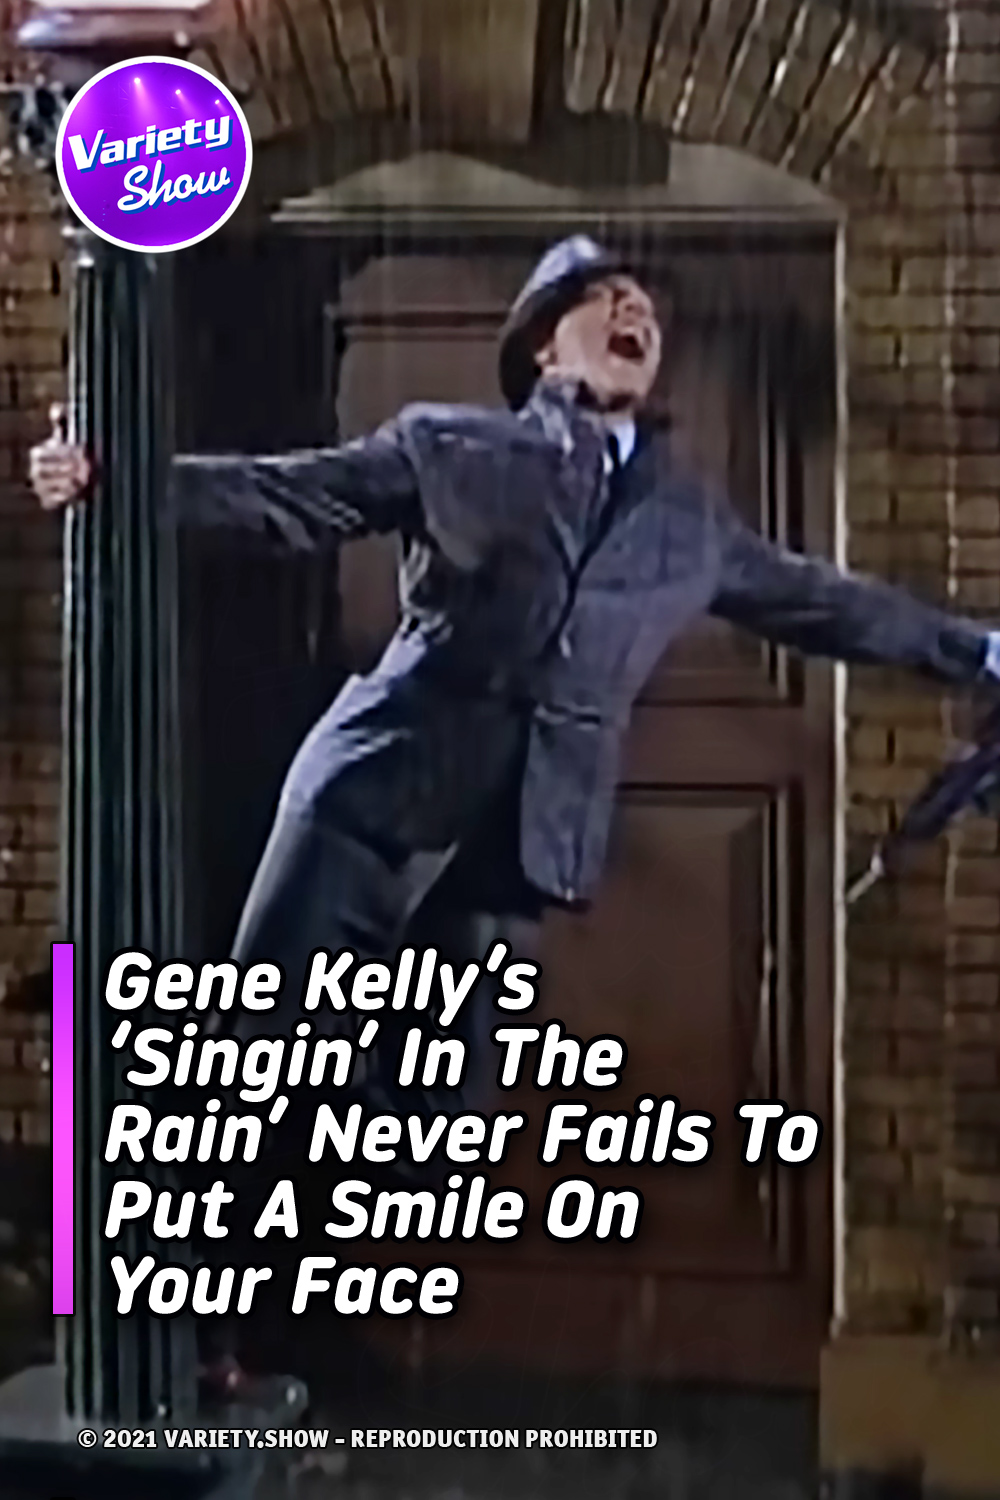 Gene Kelly’s ‘Singin’ In The Rain’ Never Fails To Put A Smile On Your Face